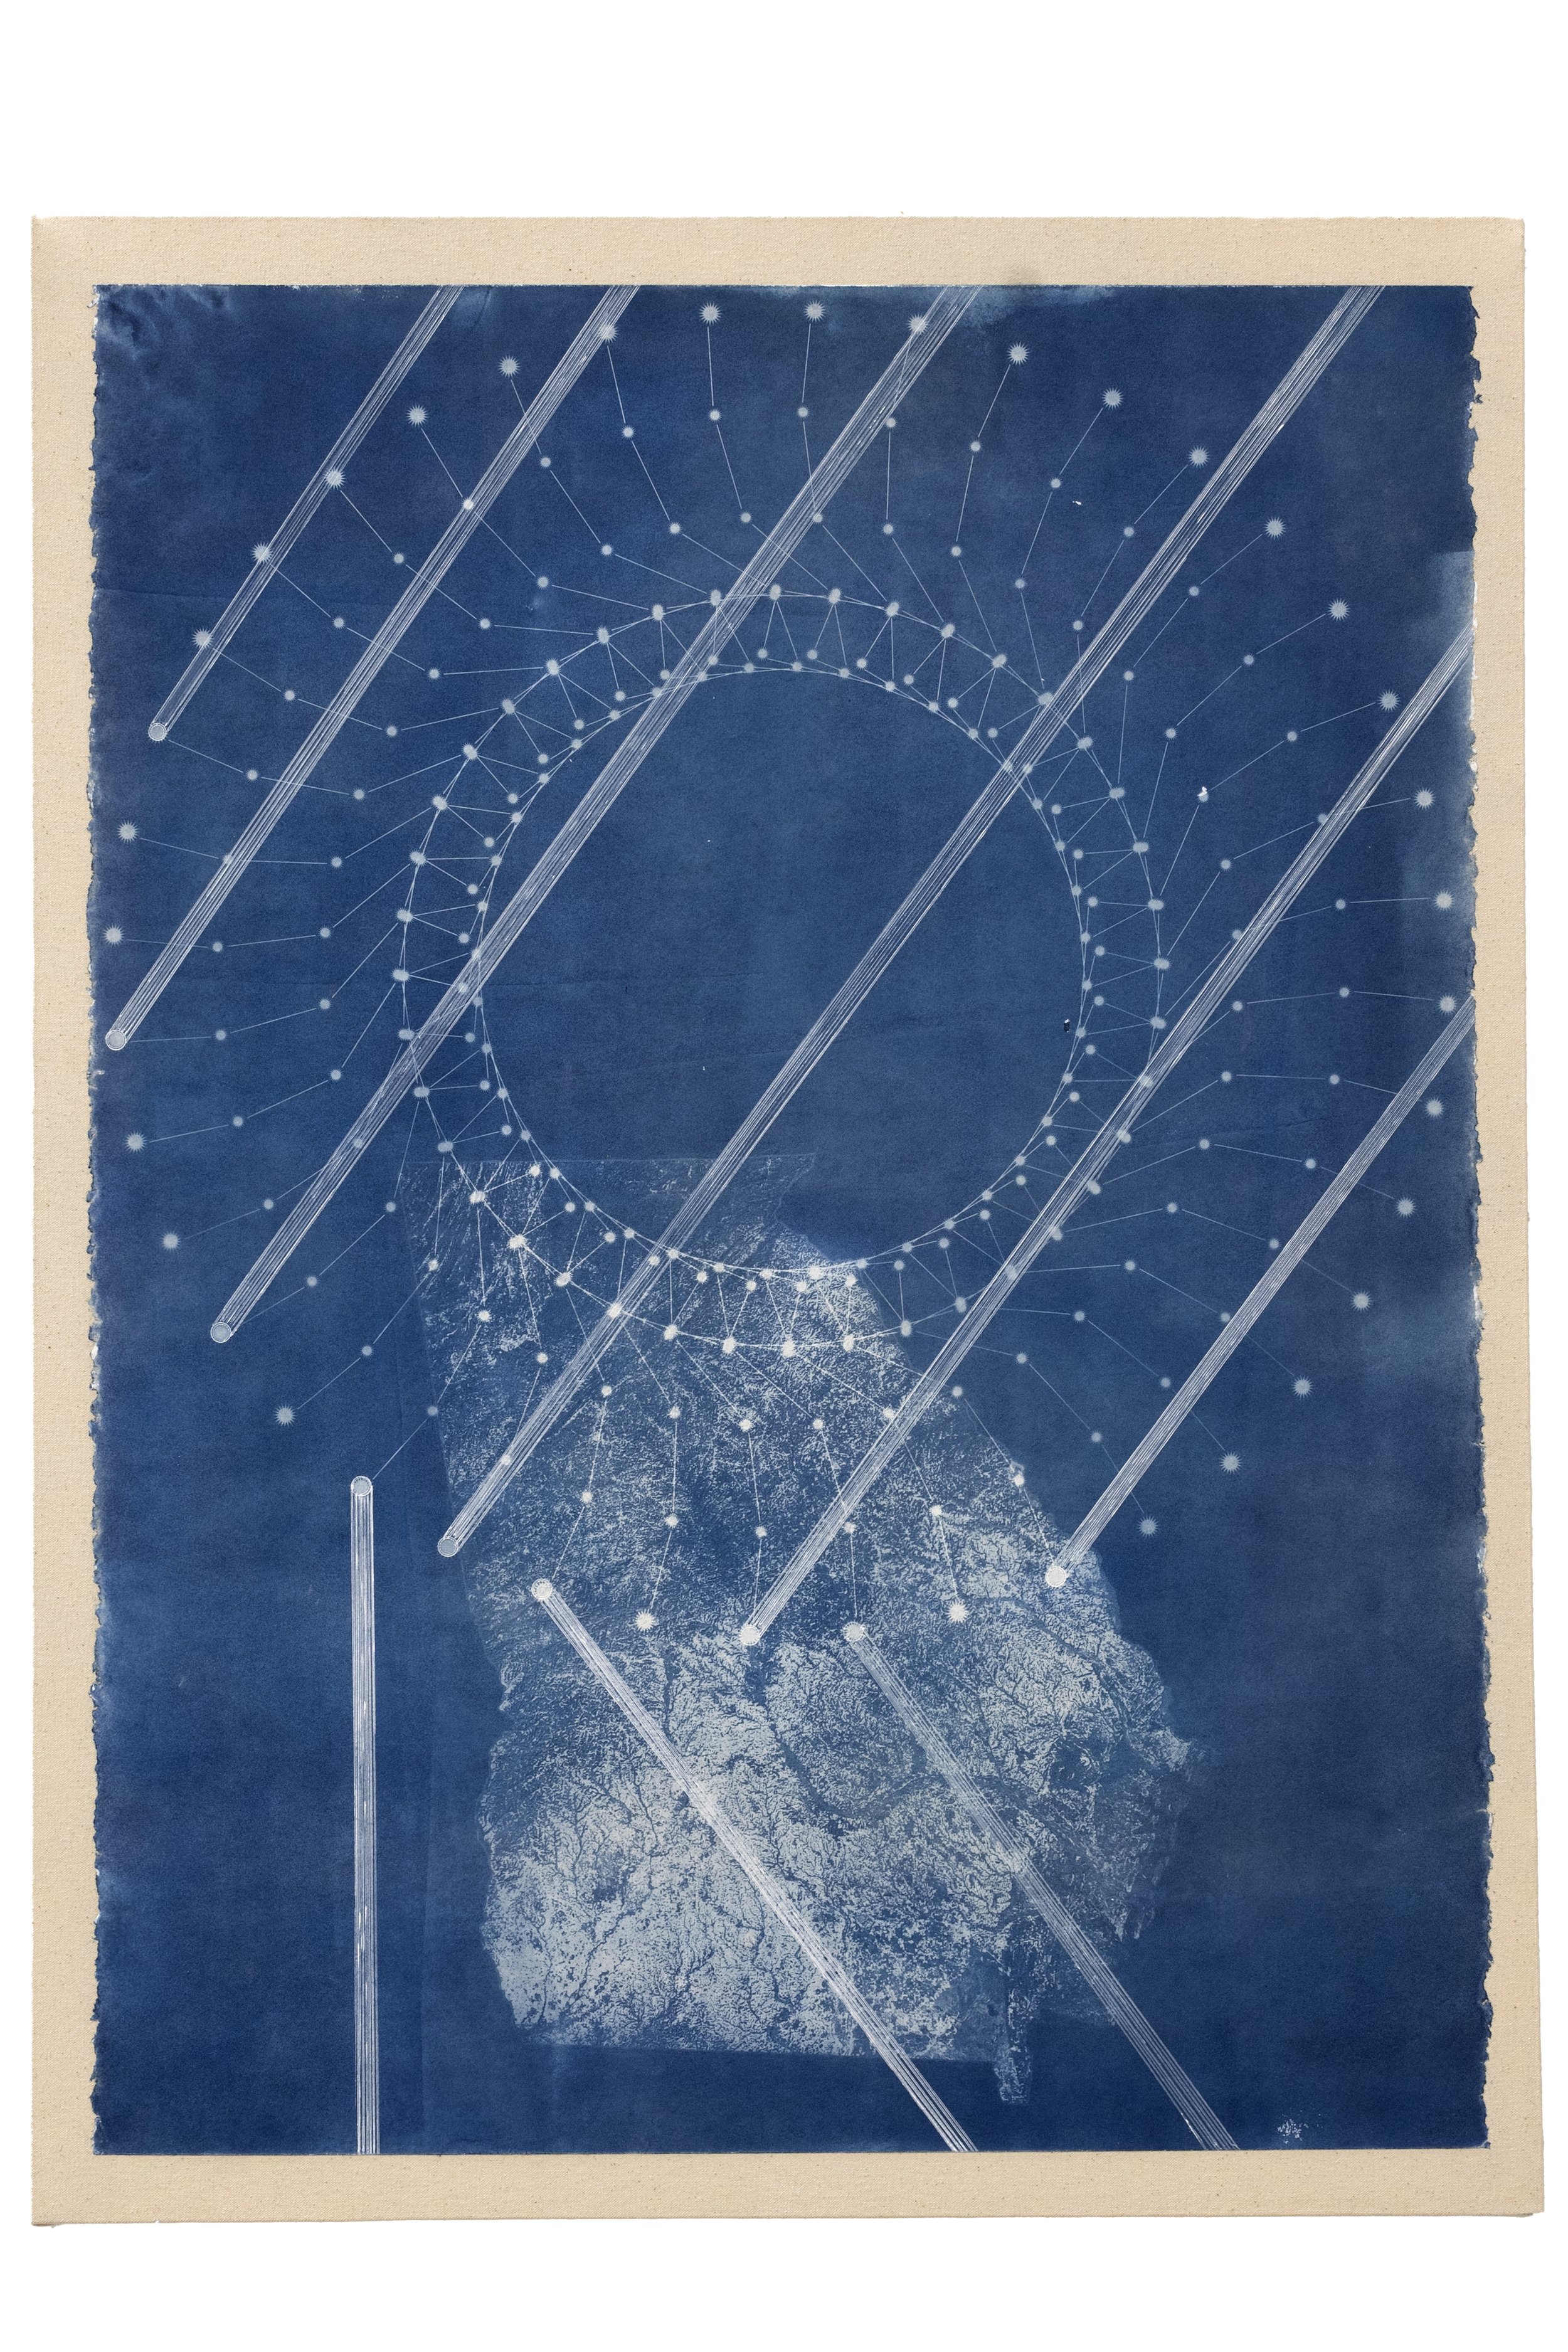    Georgia, Celestial Route M0089    Cyanotype, pen, ink, watercolor paper on canvas  32 x 24 in 